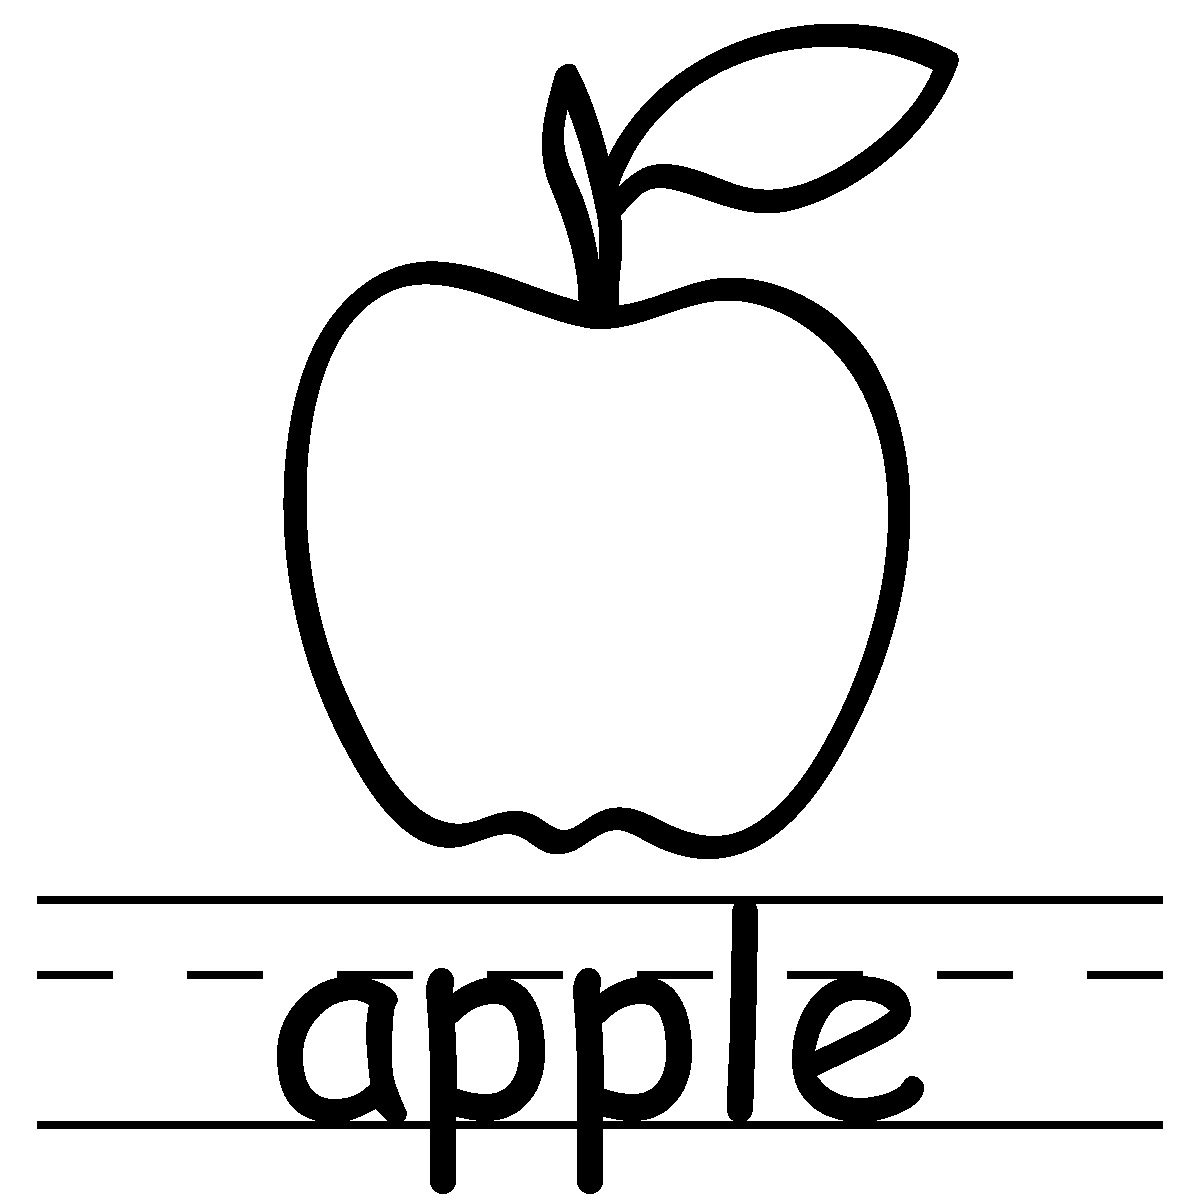 Apple black and white image of teacher clipart black and